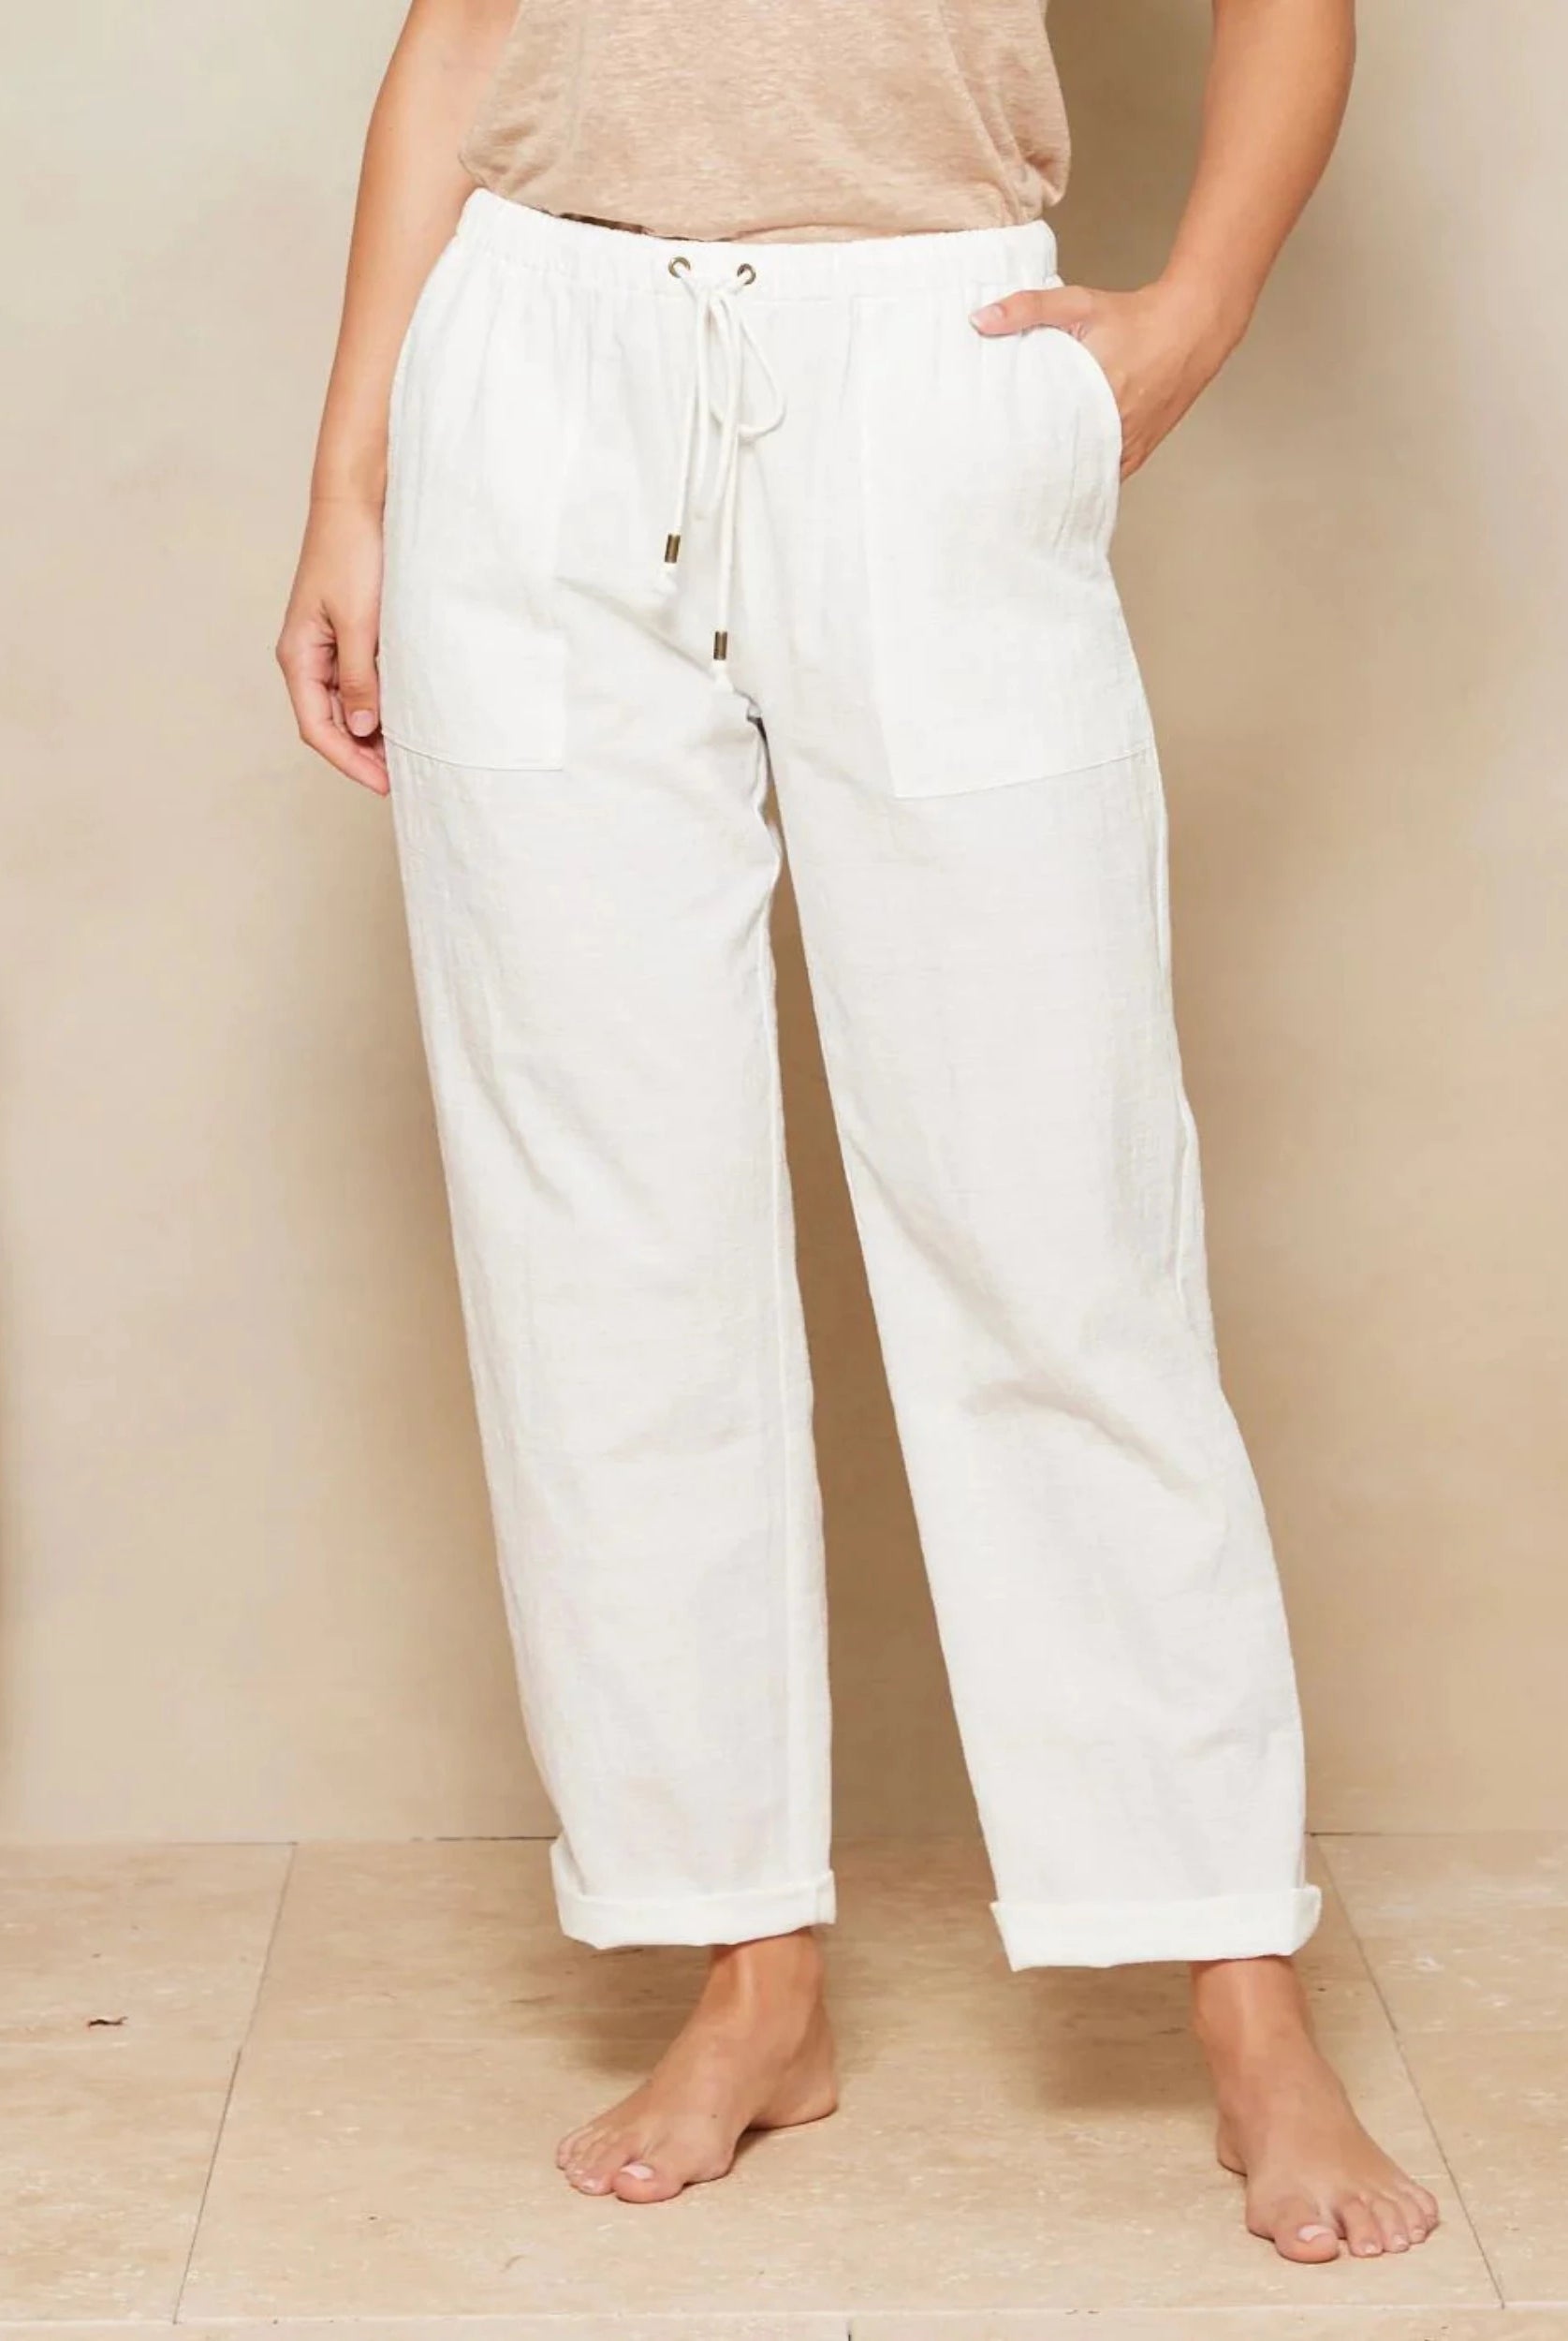 White Cotton beach pant from Tigerlily with patch pockets and a drawstring waistband